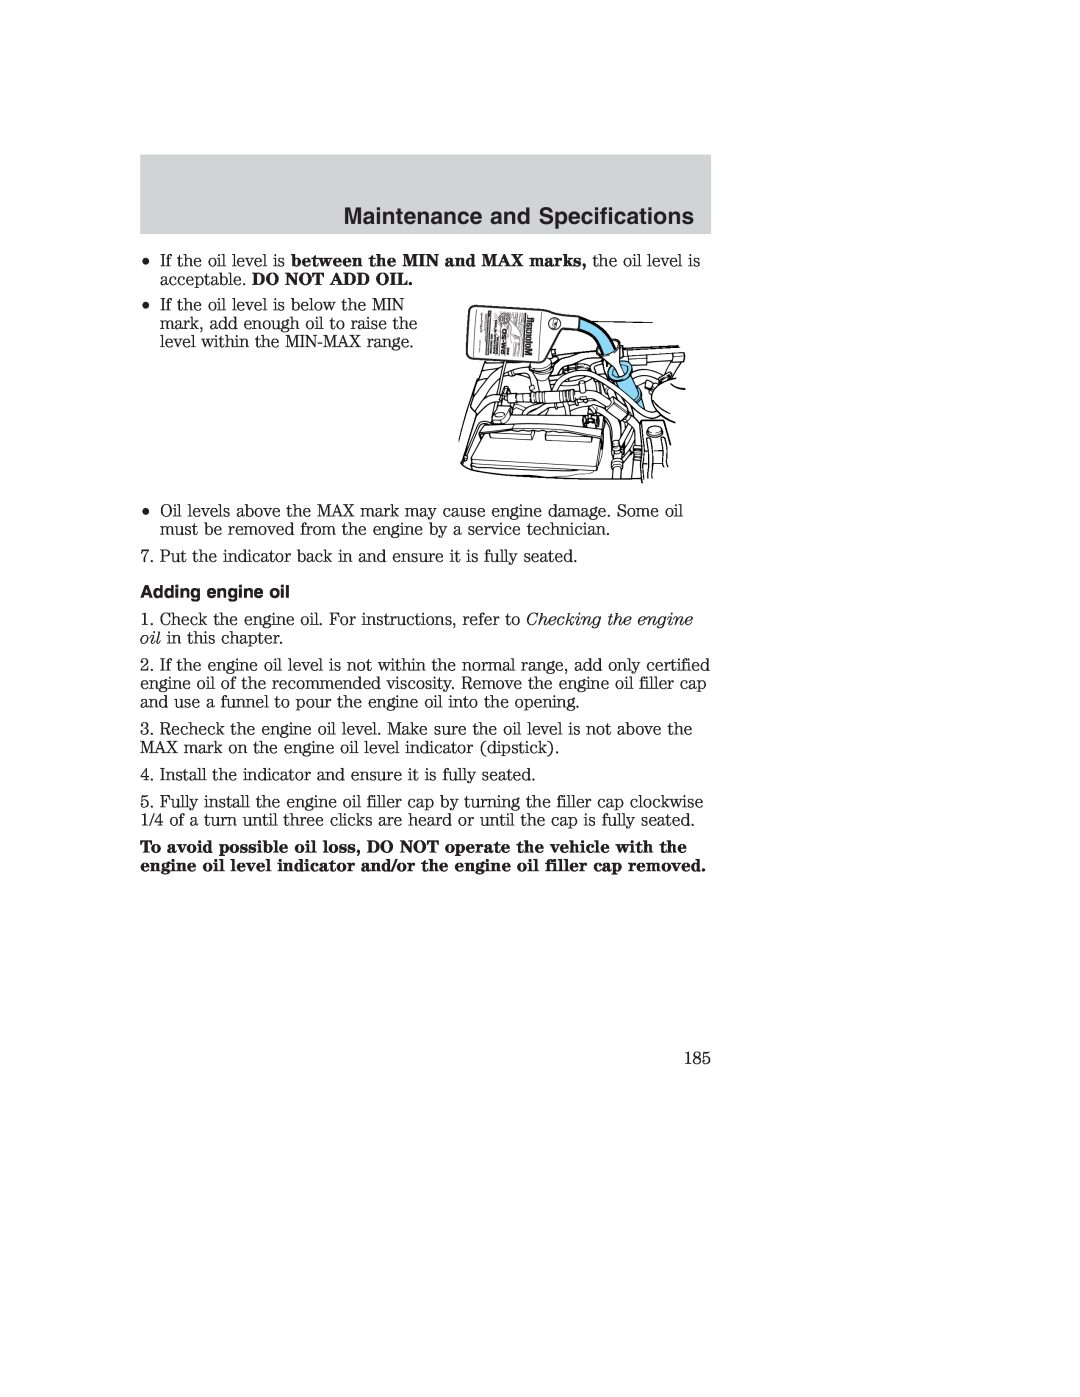 Ford AM/FM stereo manual Adding engine oil, Maintenance and Specifications 